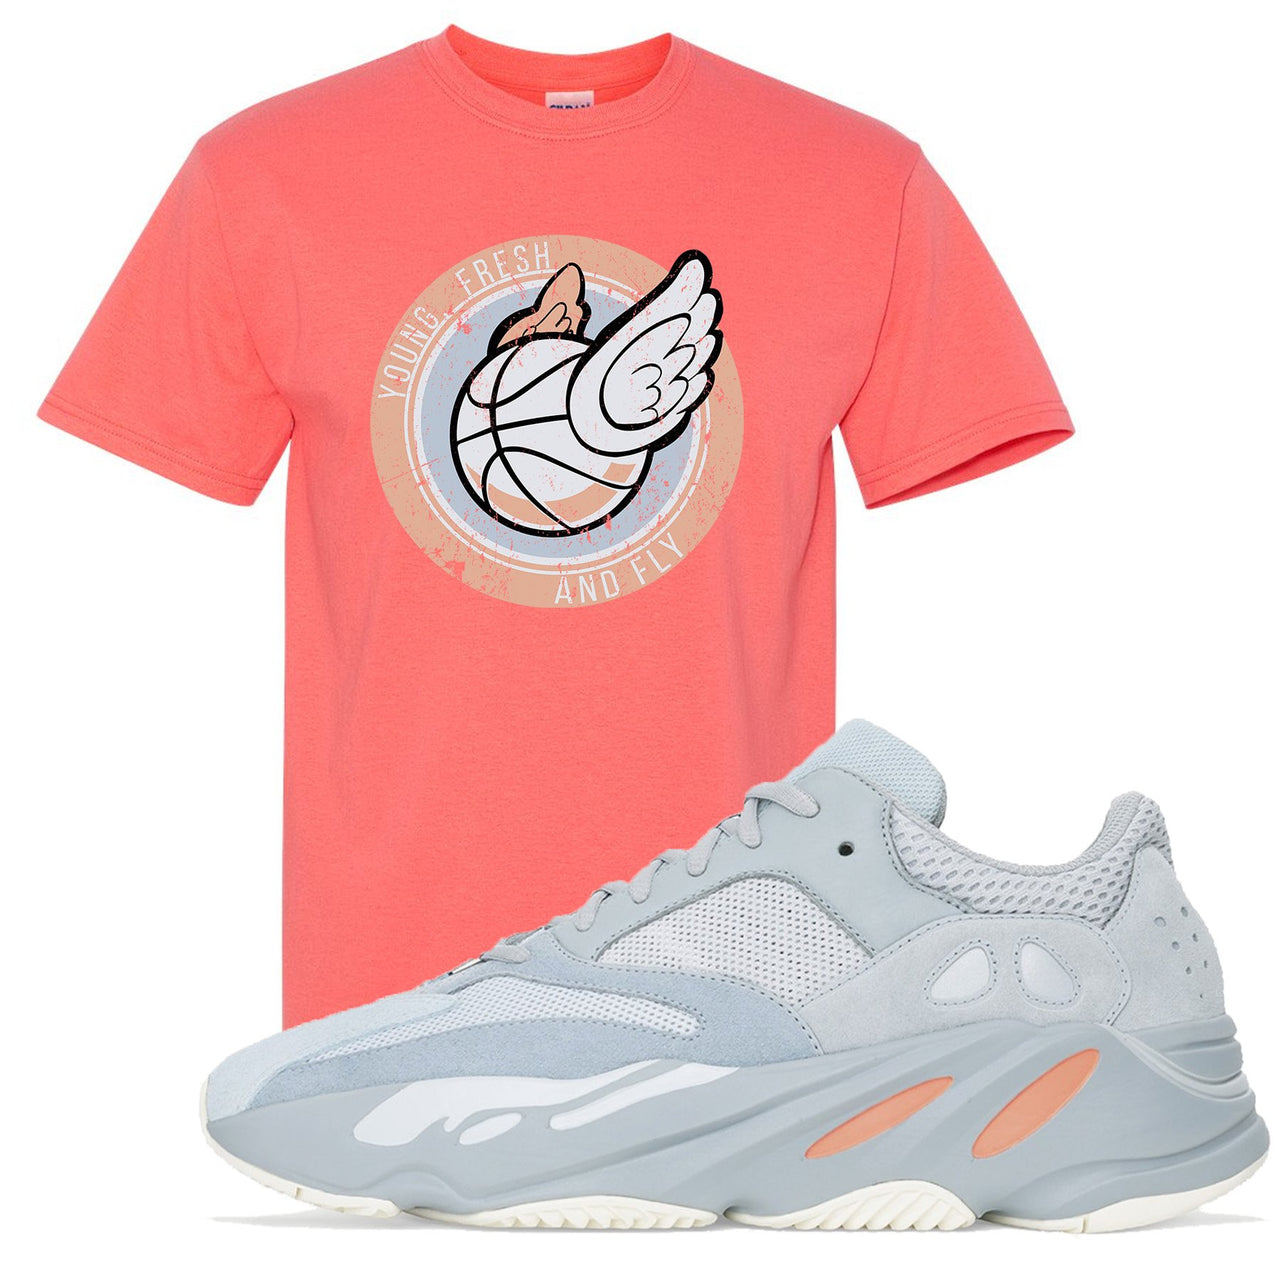 Inertia 700s T Shirt | Young Fresh and Fly, Coral Silk